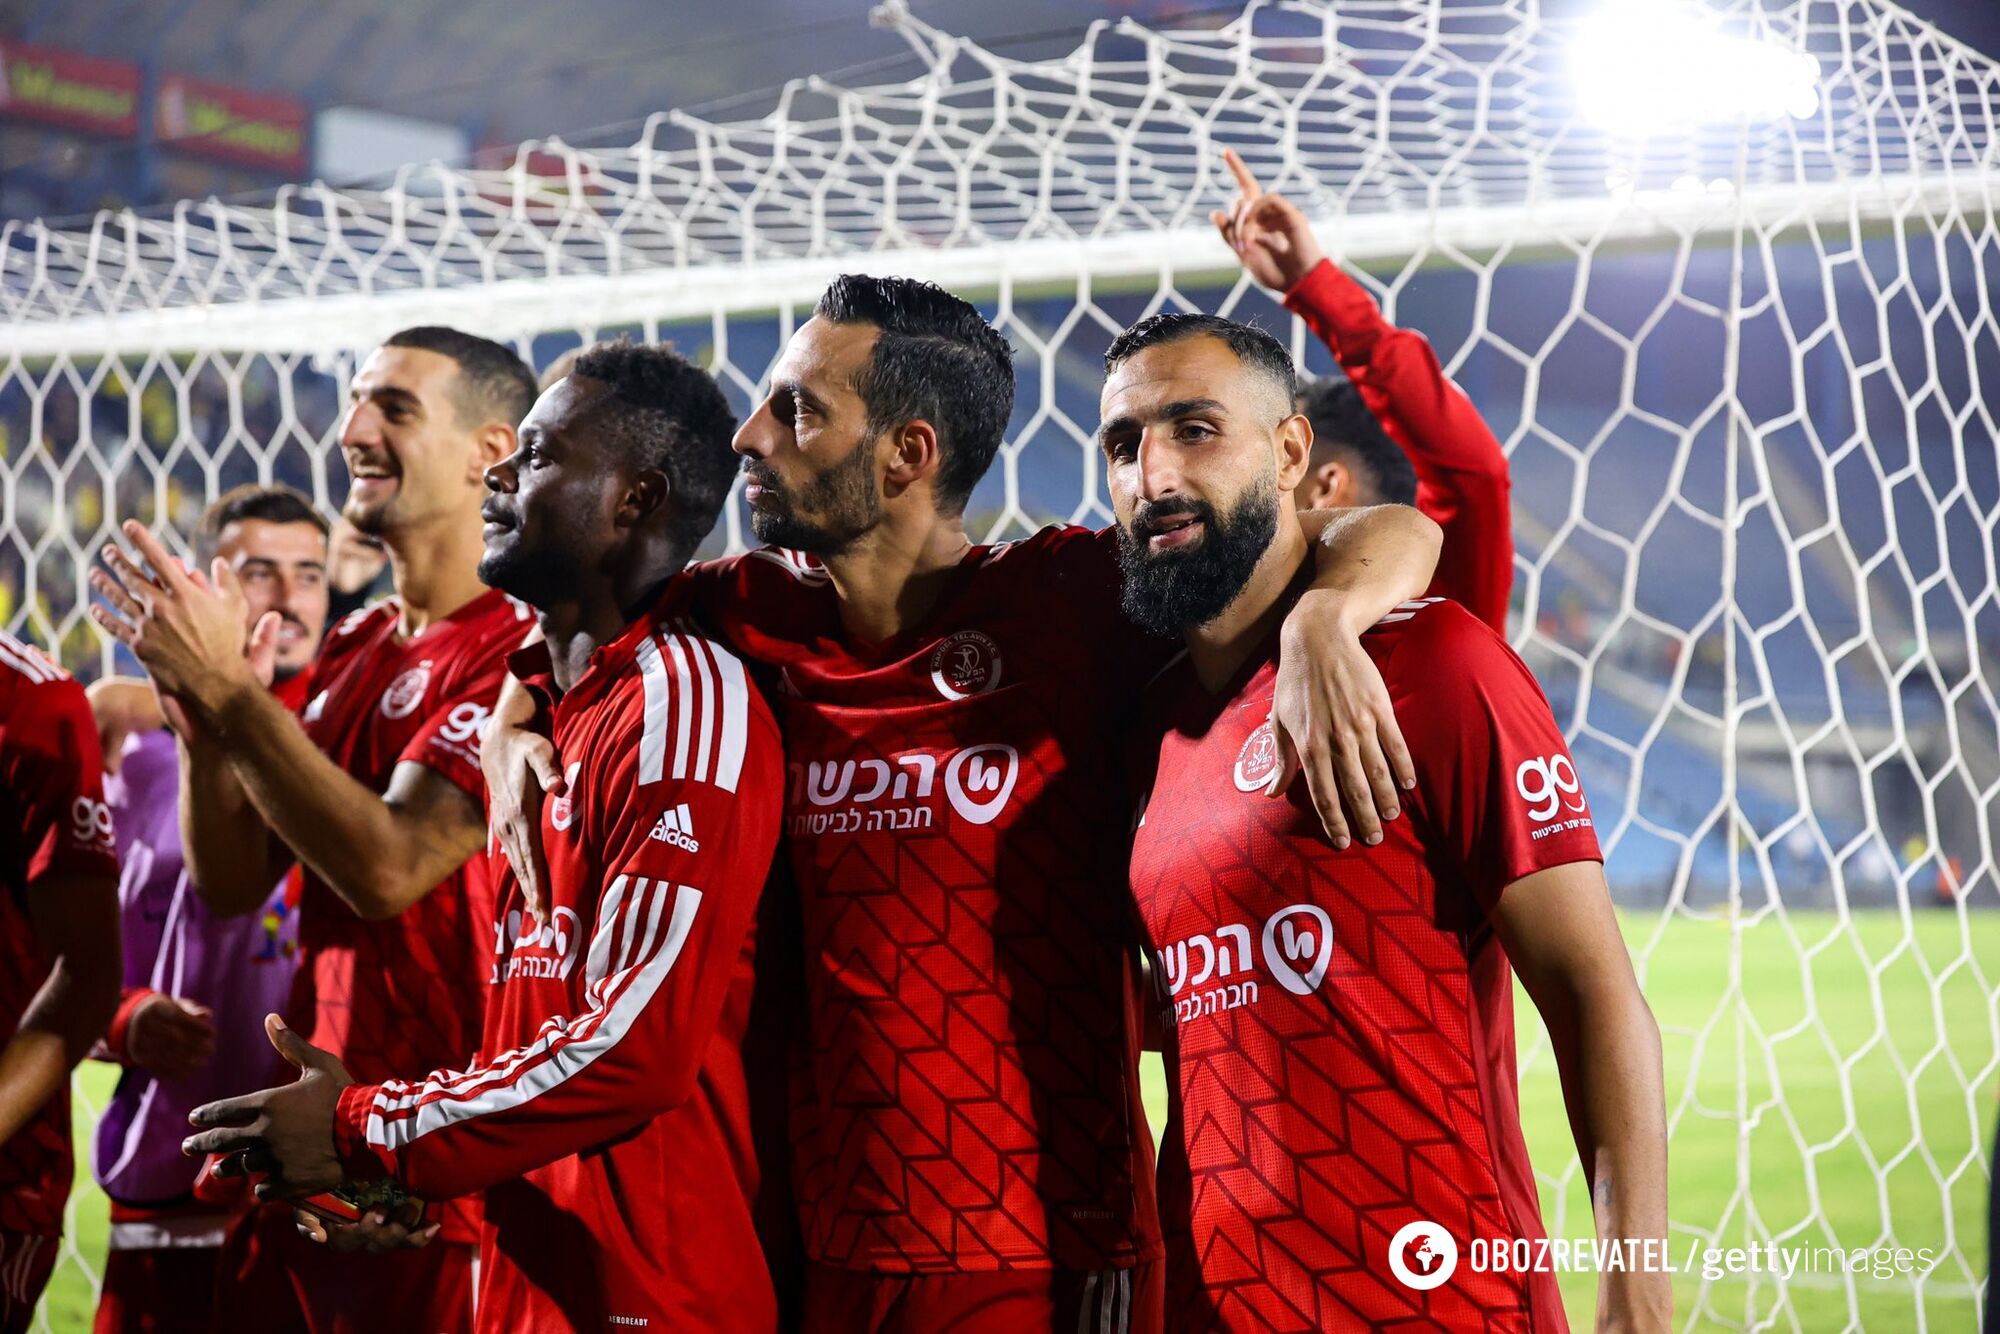 ''Israel did not expect this. I am amazed at the scale.'' The Hapoel football player spoke about what is happening in the country